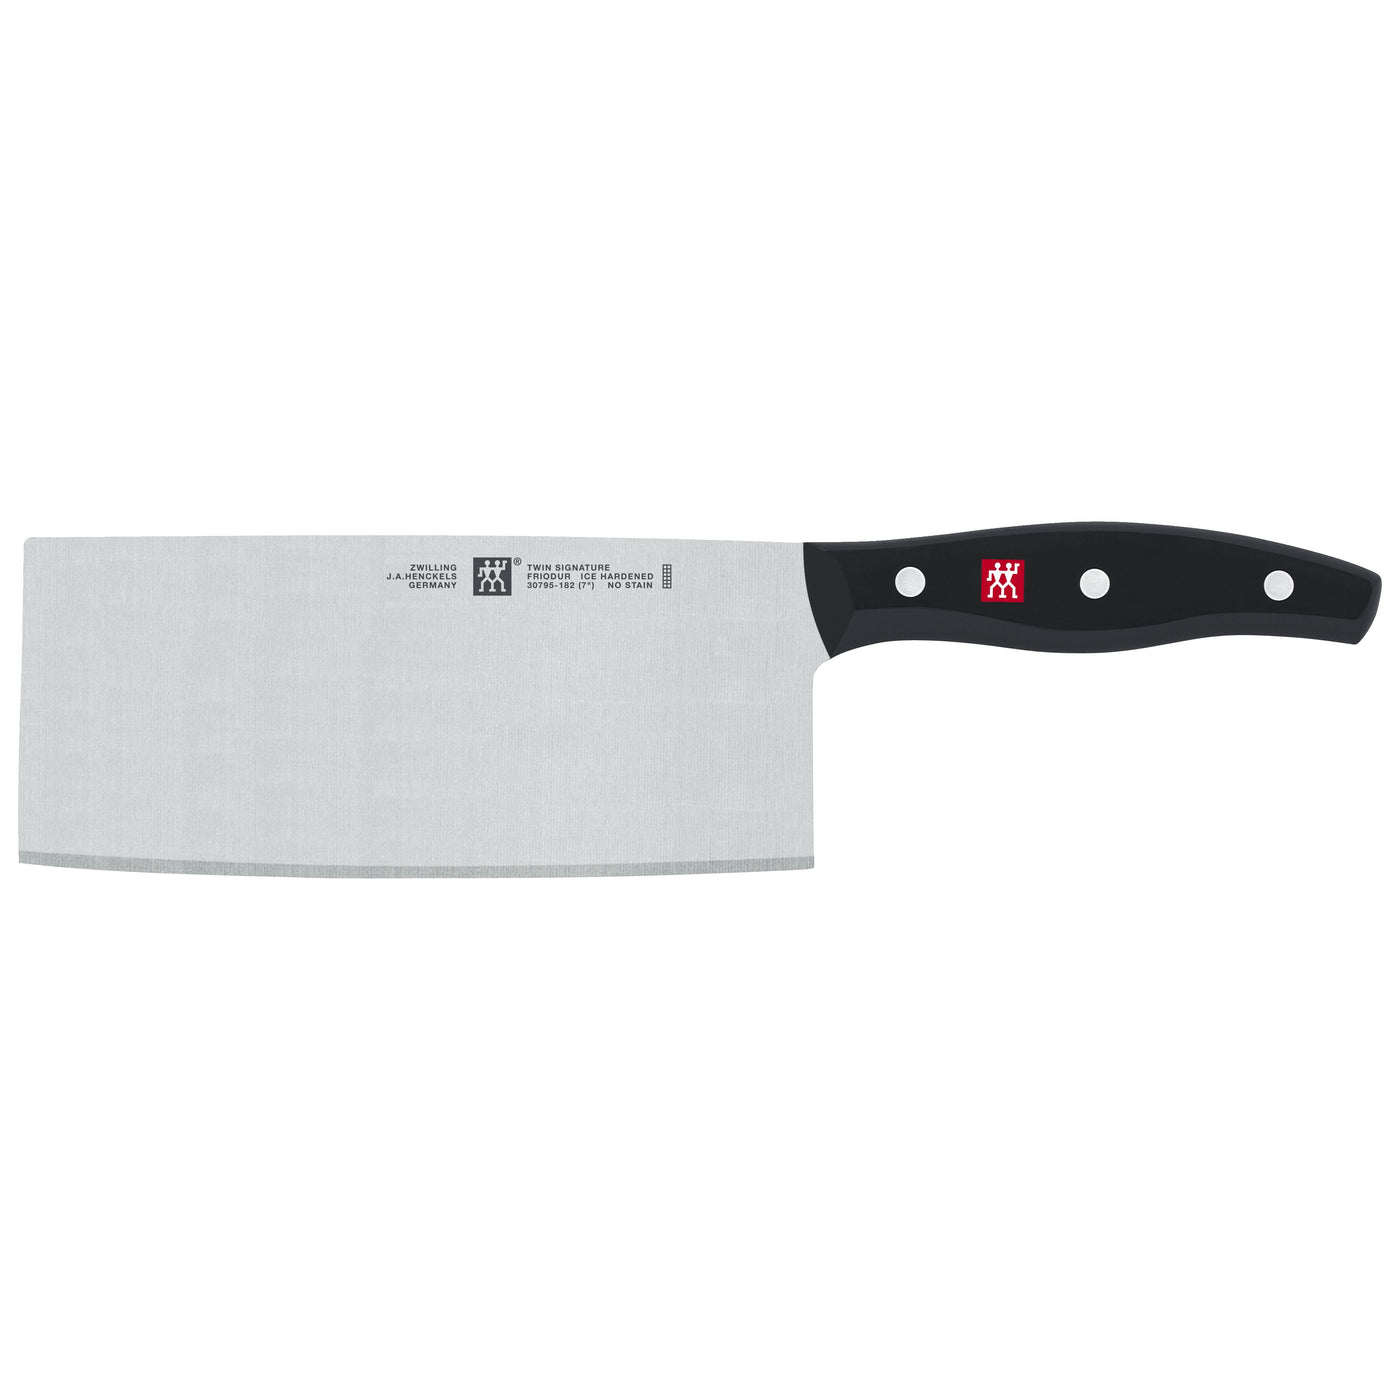 ZWILLING Tradition 7 Vegetable Cleaver